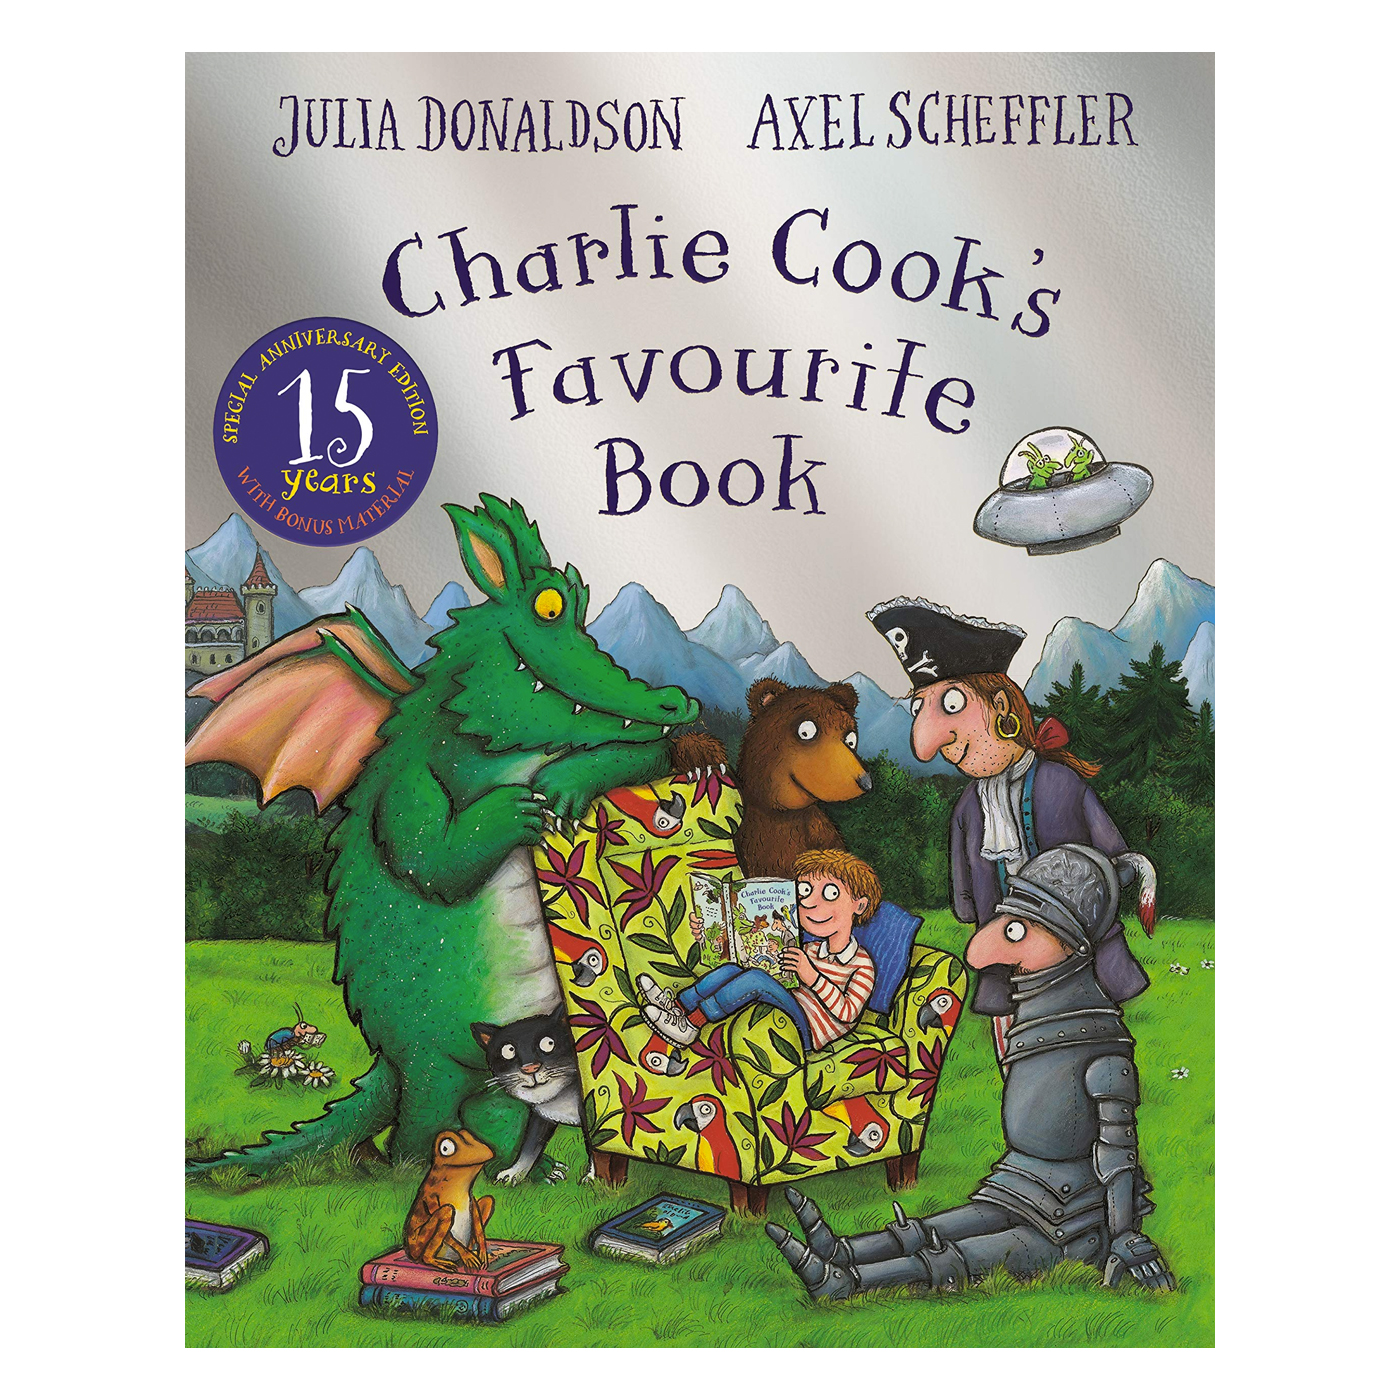  Charlie Cook's Favourite Book